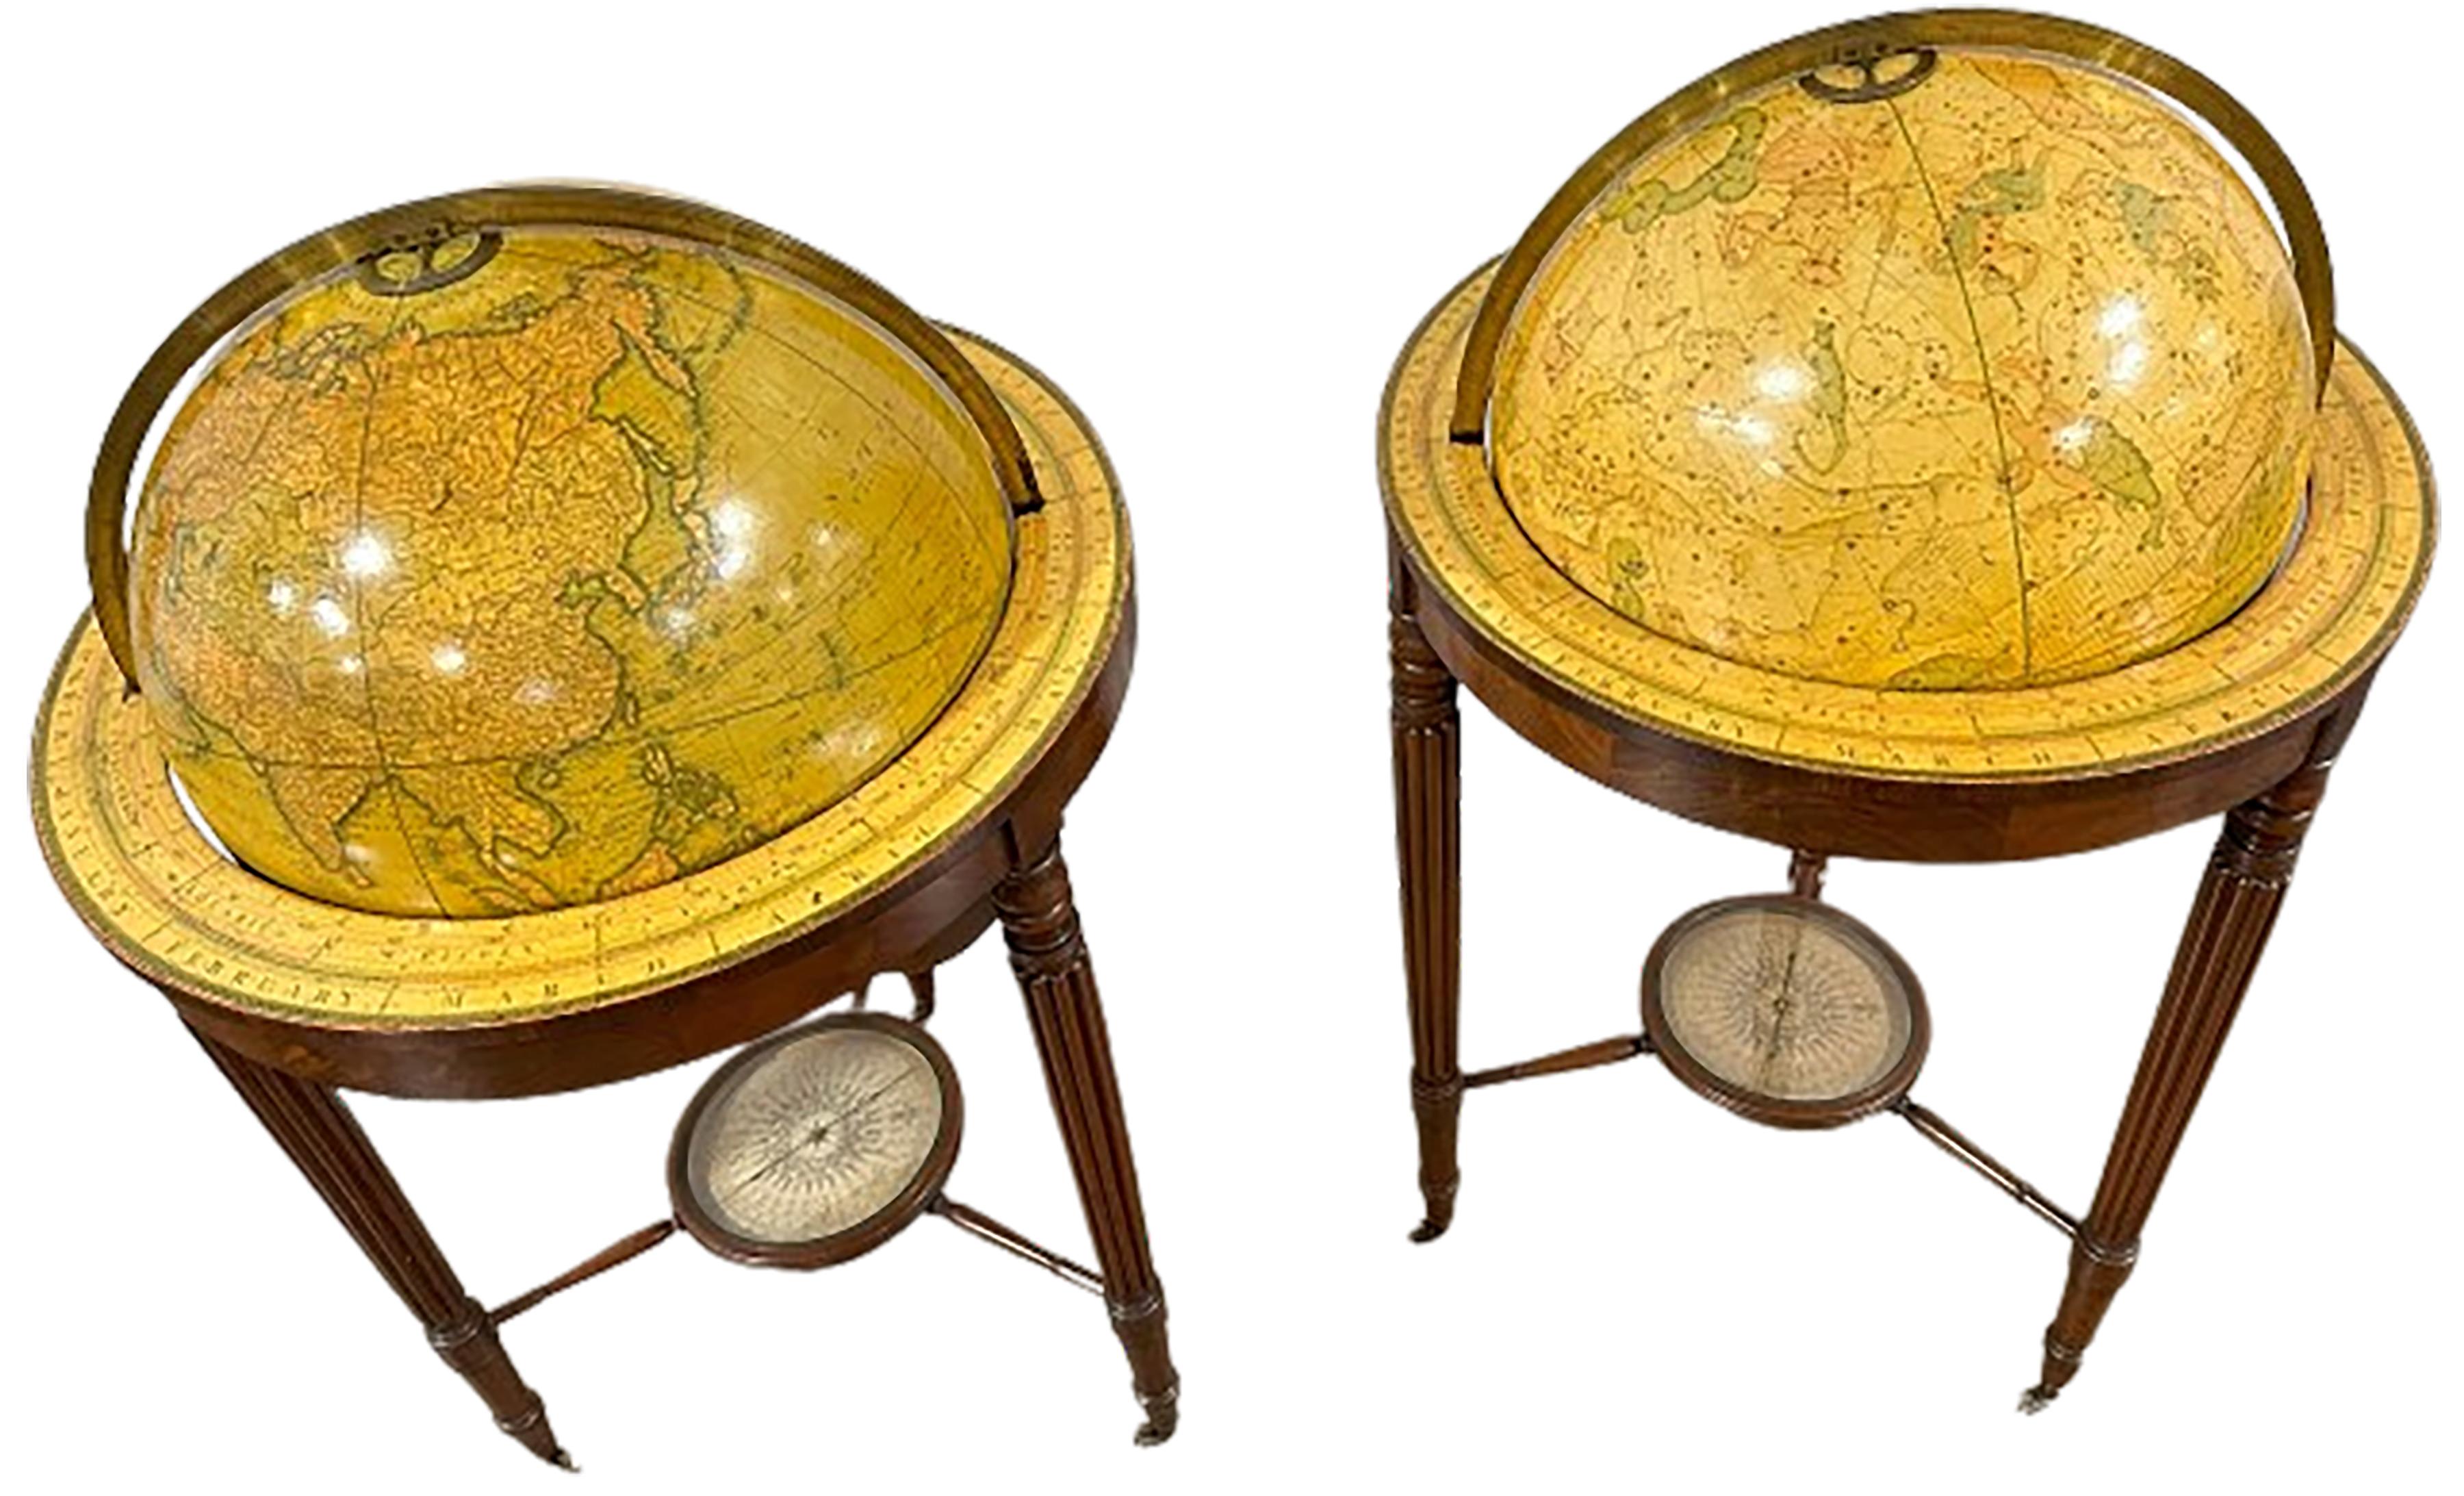 A handsome set of collectable Mid 19th Century library Globes with compasses on castors. Created by George Fredrick Cruchley circa 1850. Compasses sit directly below the globes. Very rare. 

Cruchley's large, detailed library globes offer precise